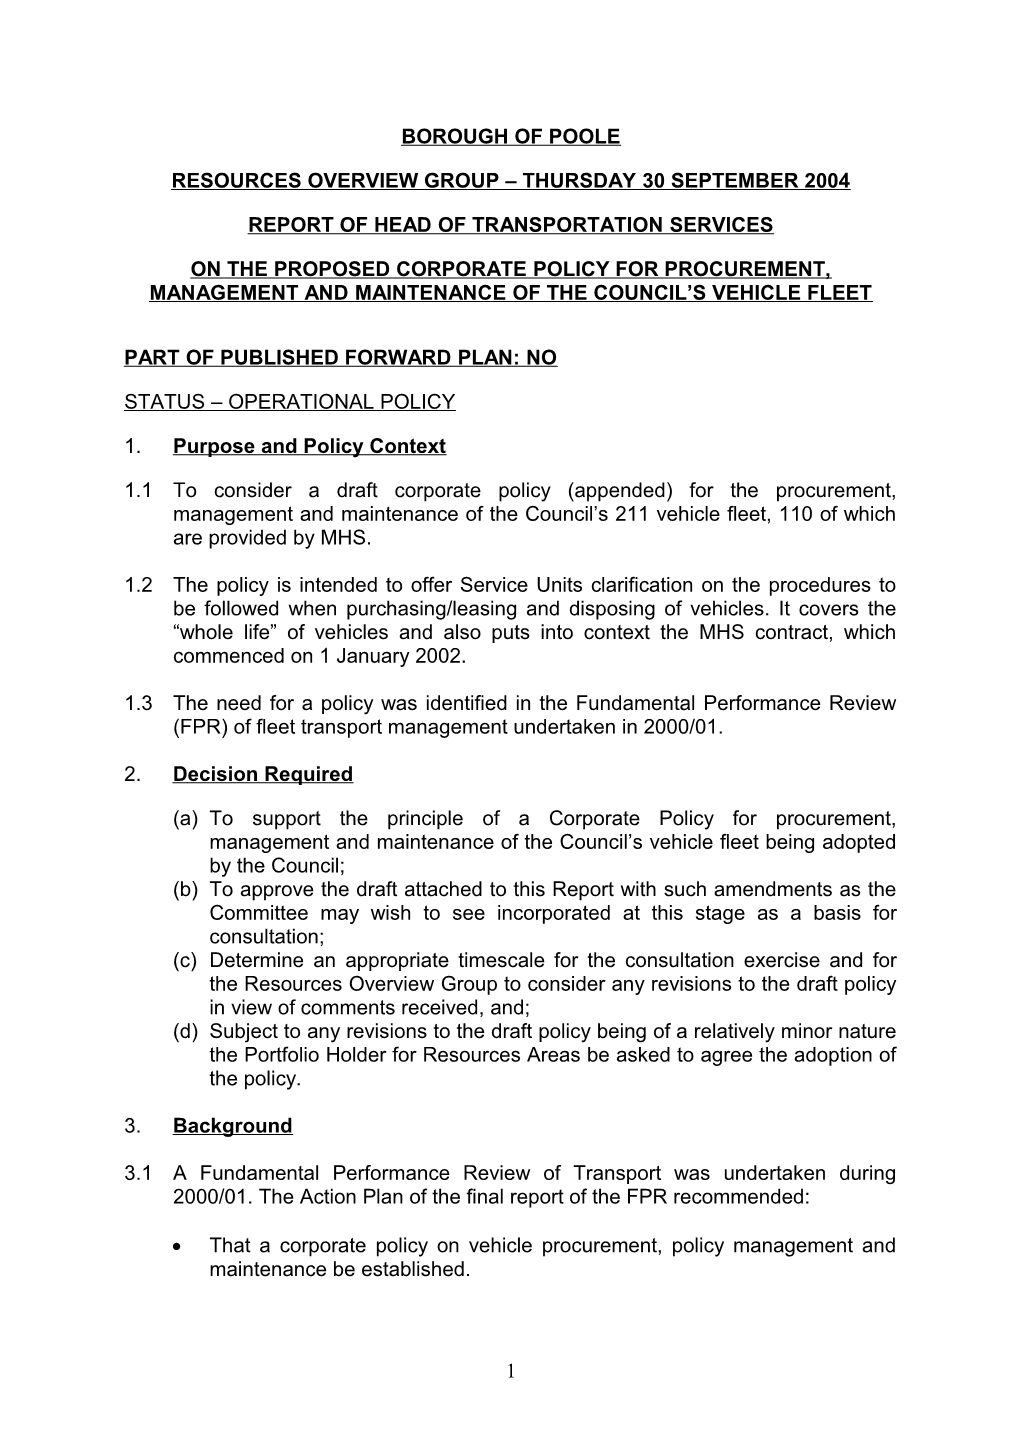 The Proposed Corporate Policy for Procurement, Management and Maintenance of the Council